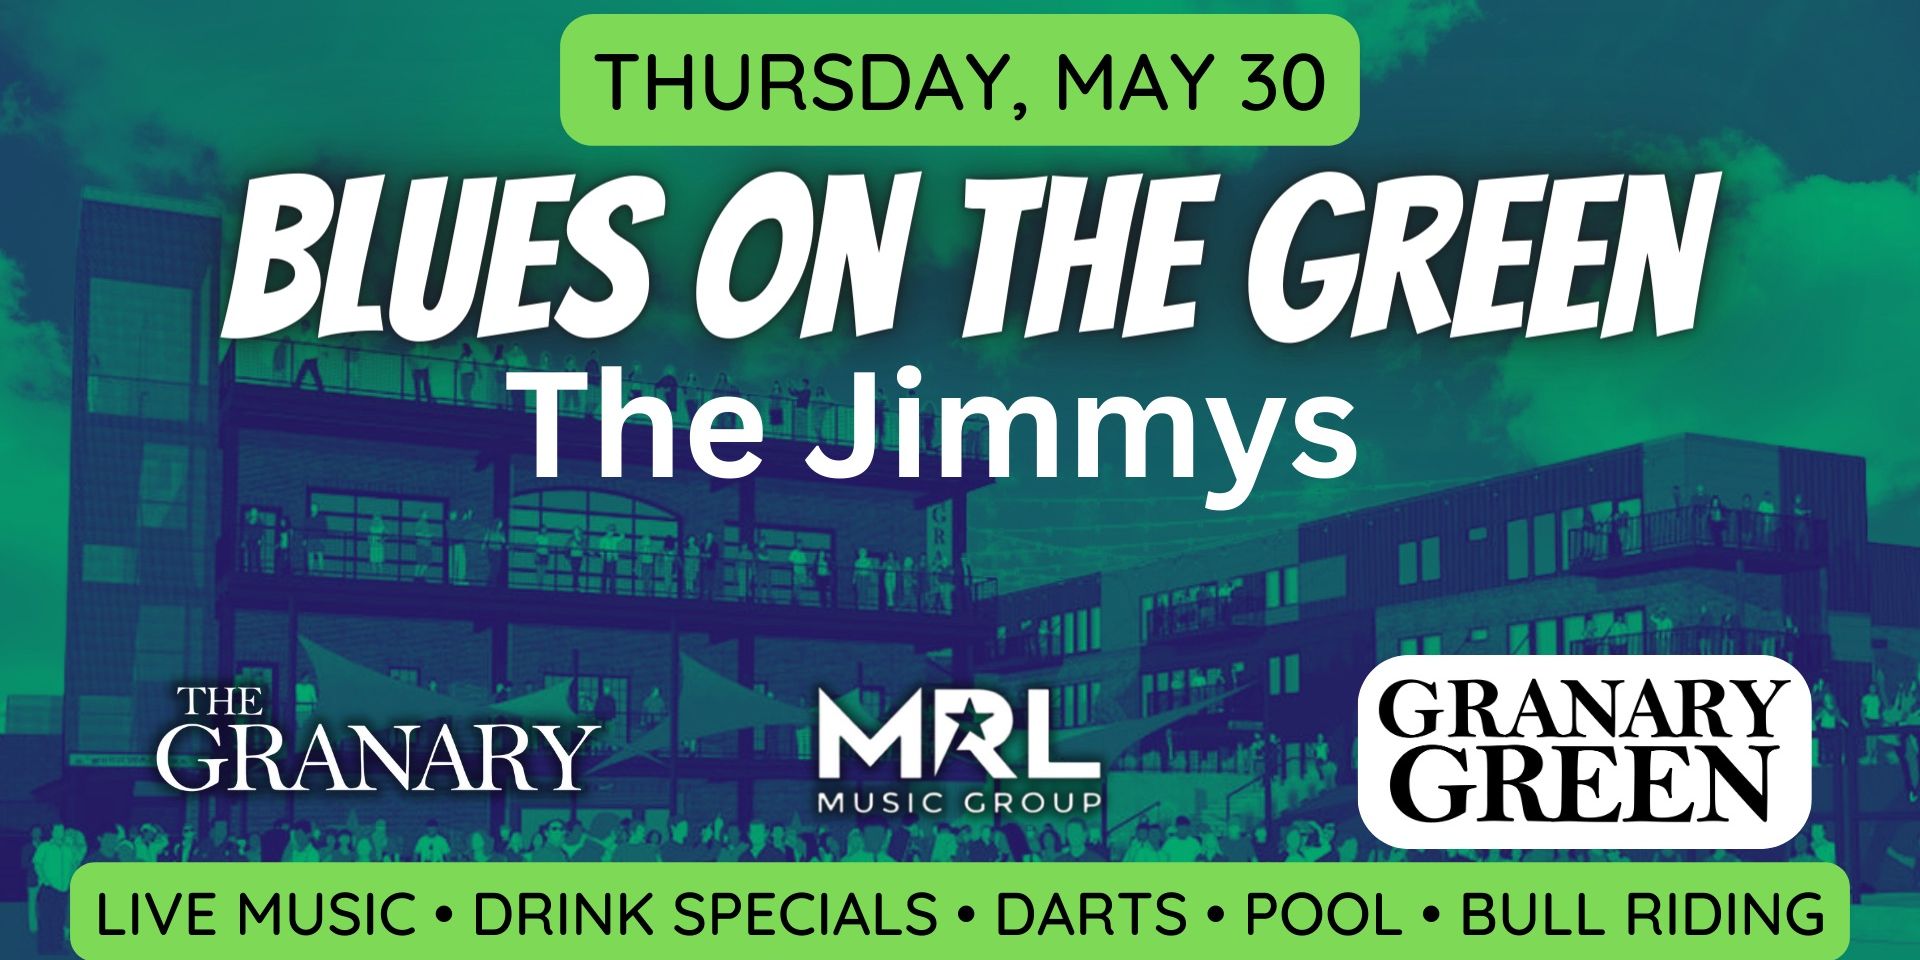 Blues on the Green with The Jimmys promotional image